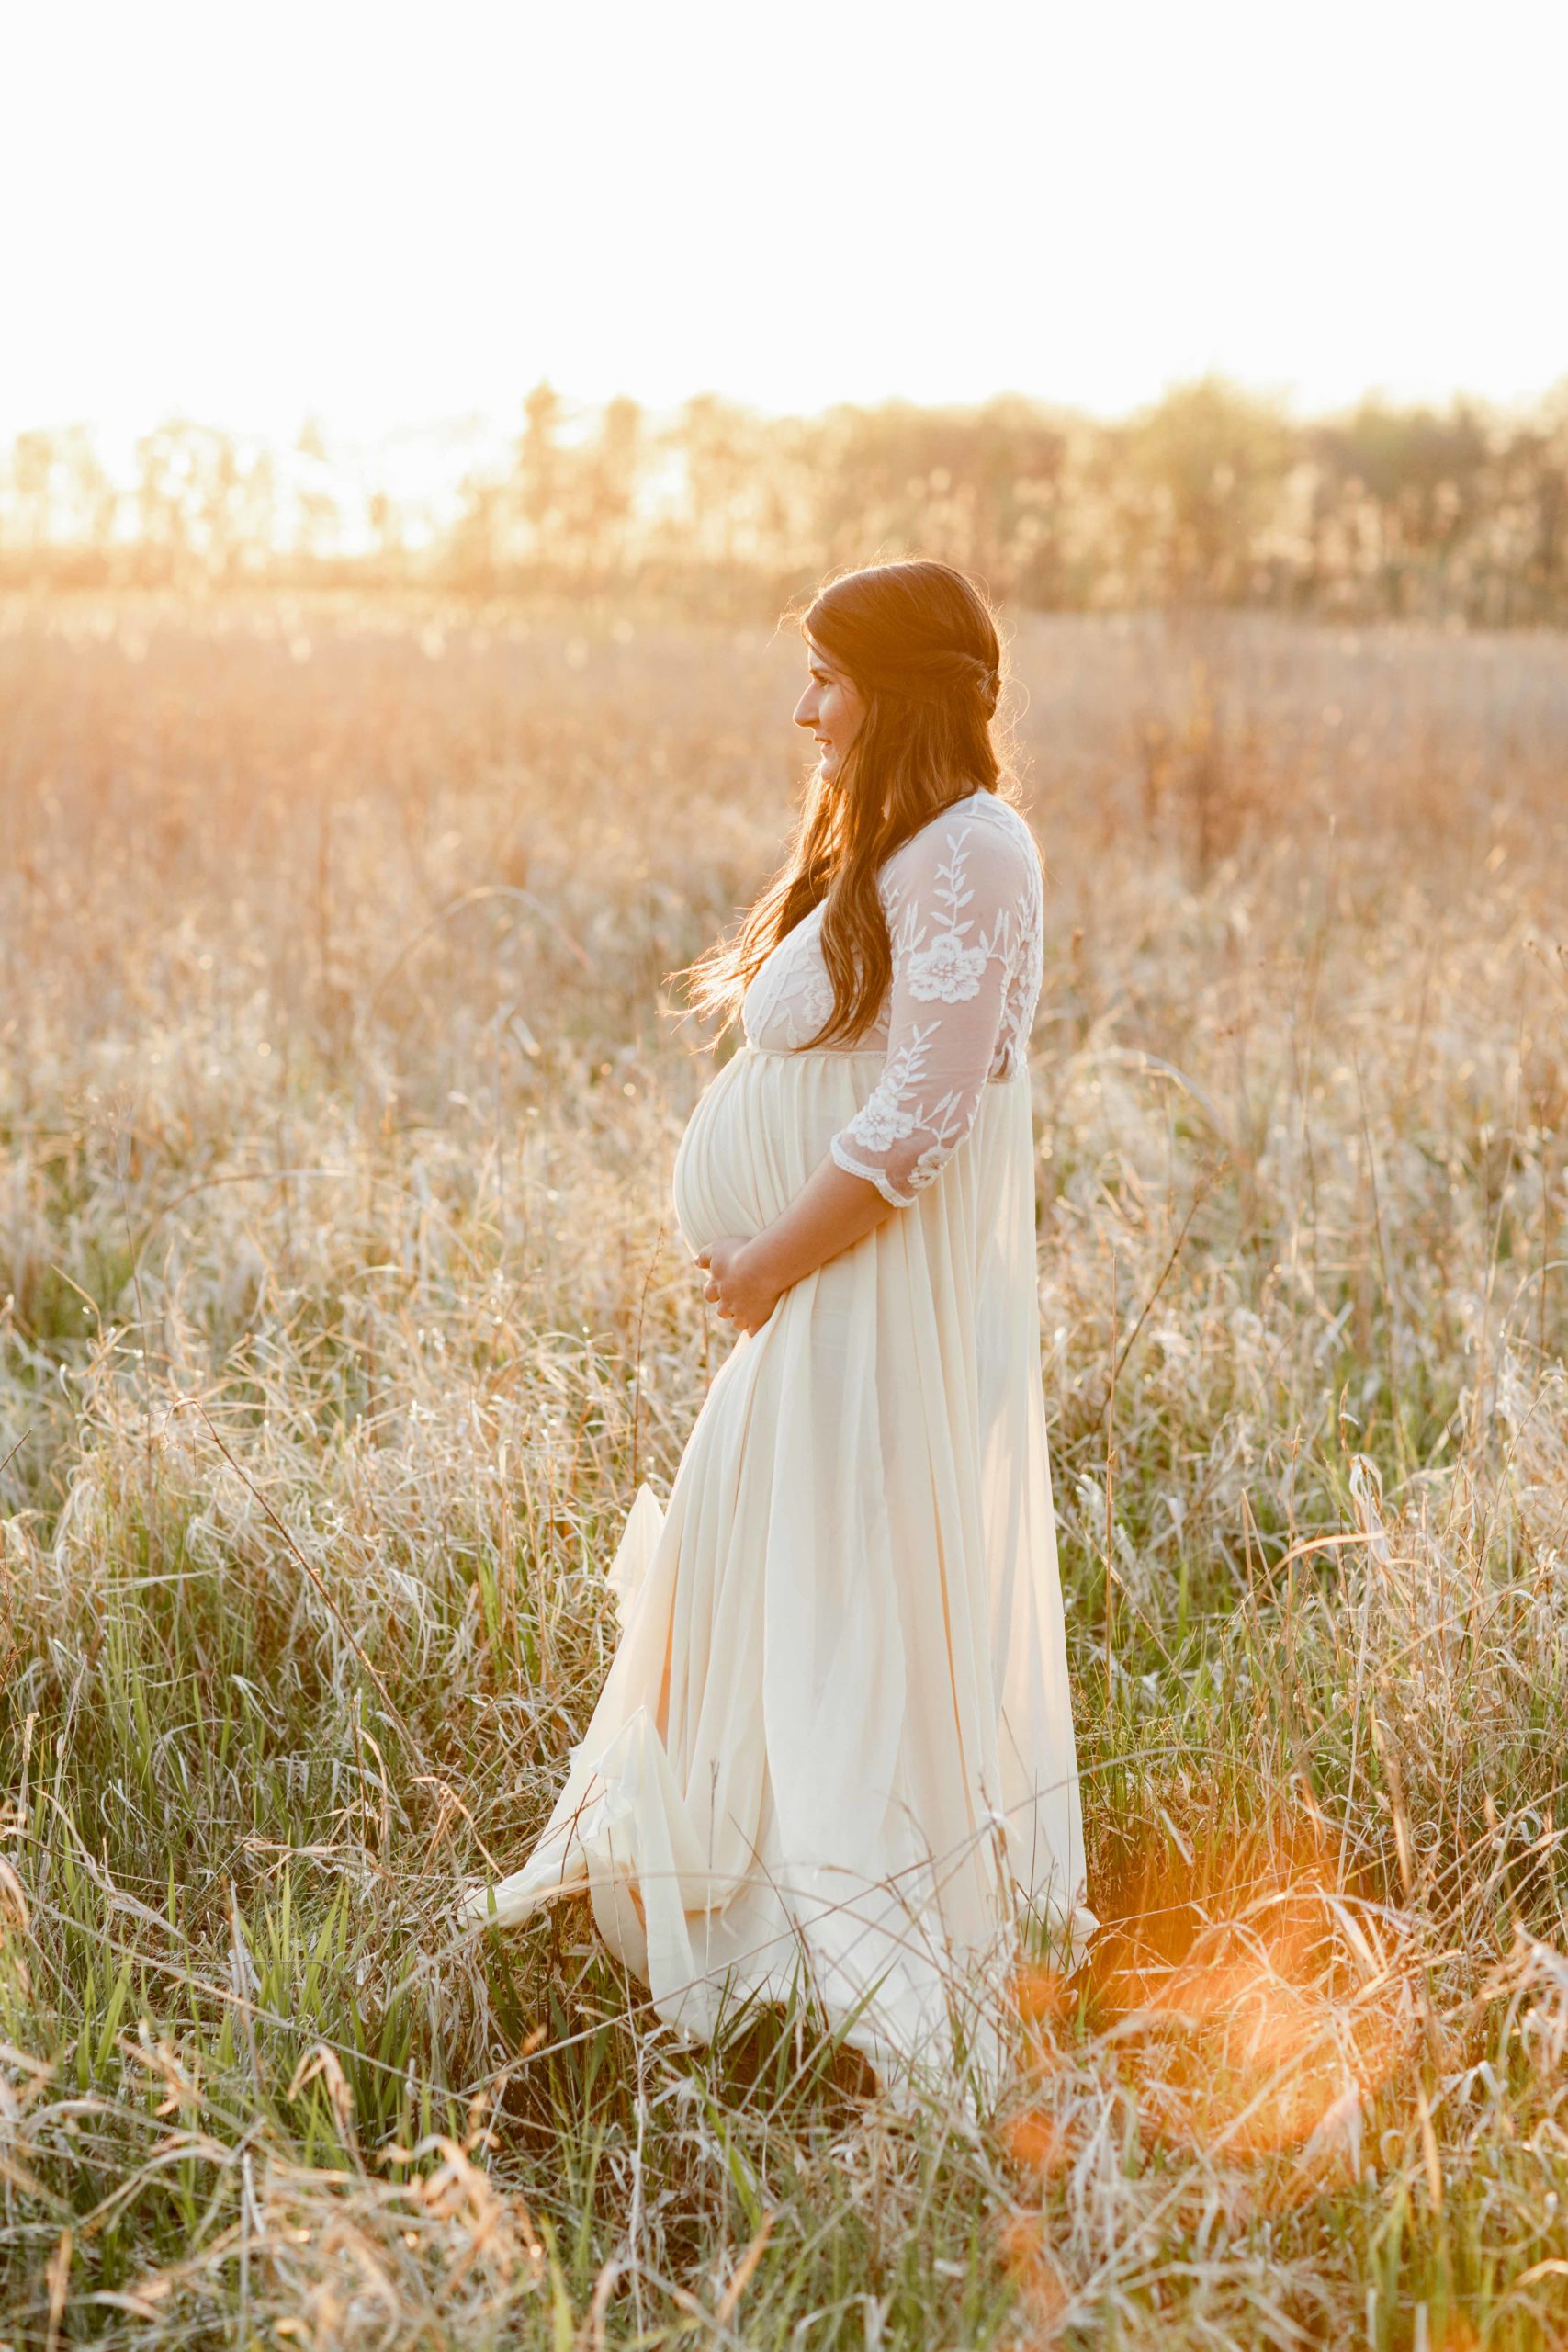 Outdoor Golden Hour Geneva Illinois Maternity Photography in a field